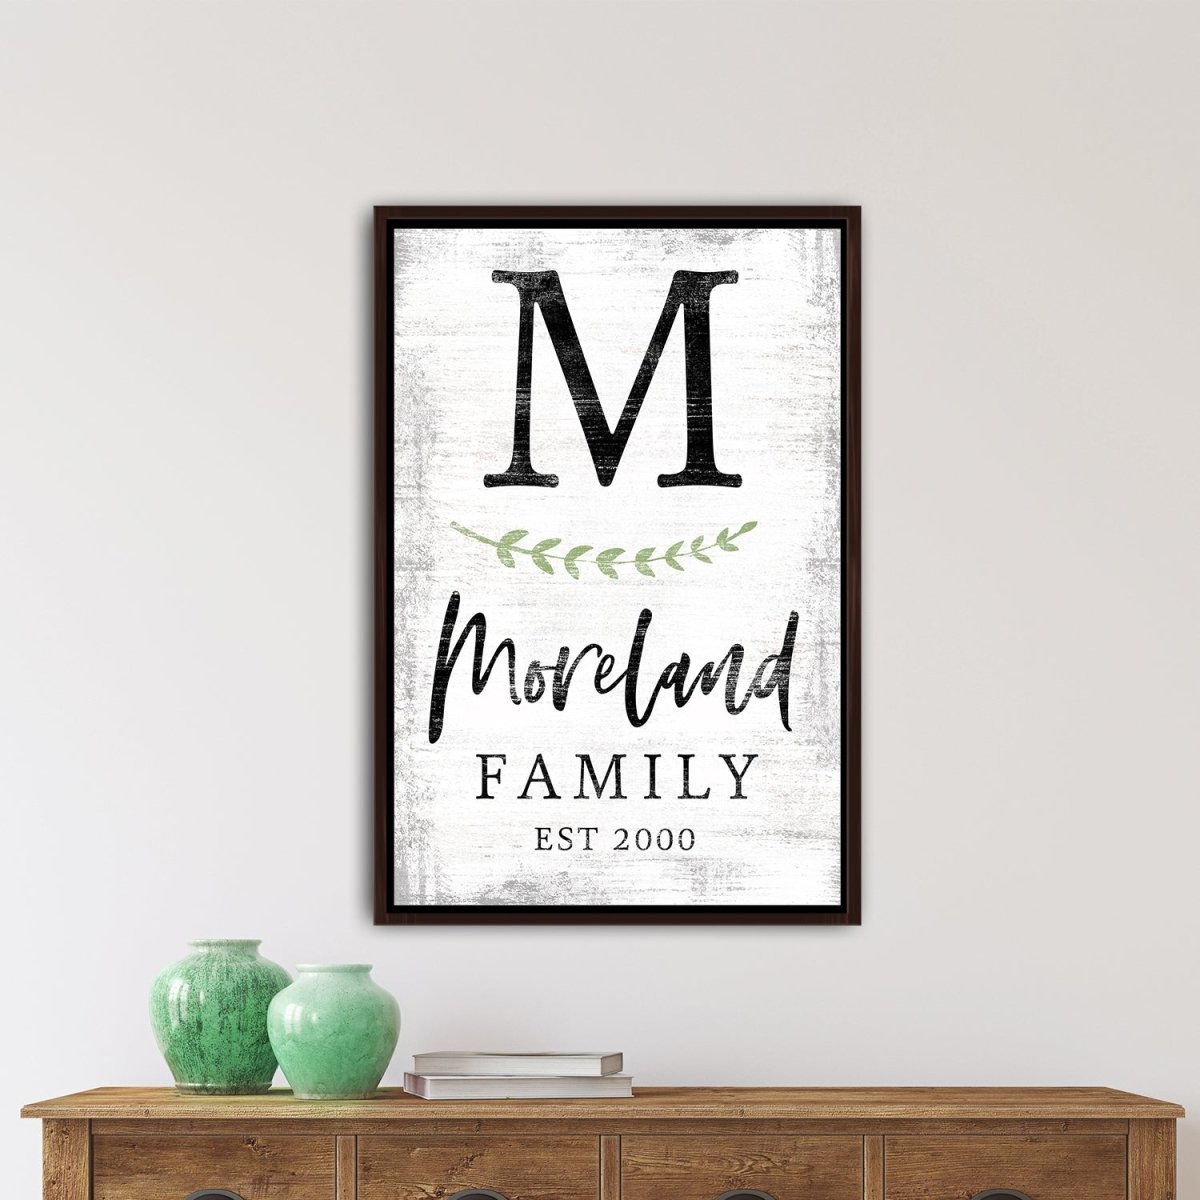 Monogram Family Name Sign with Established Date Above Entryway Table - Pretty Perfect Studio